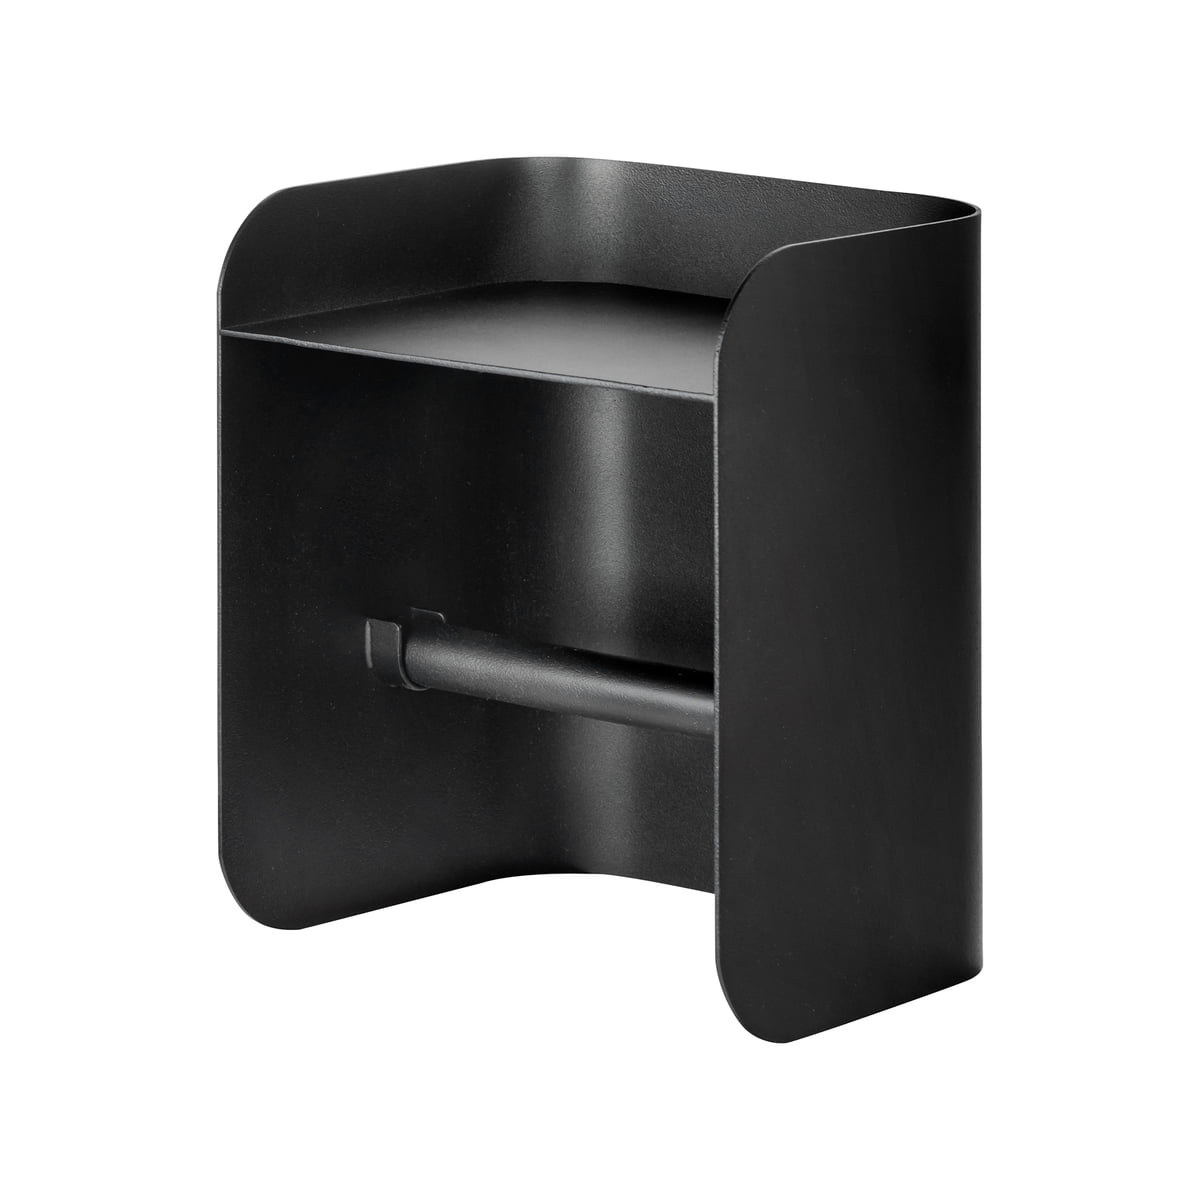 Mette Ditmer - Carry Toilet Paper Holder with Shelf, Black CARTRH09